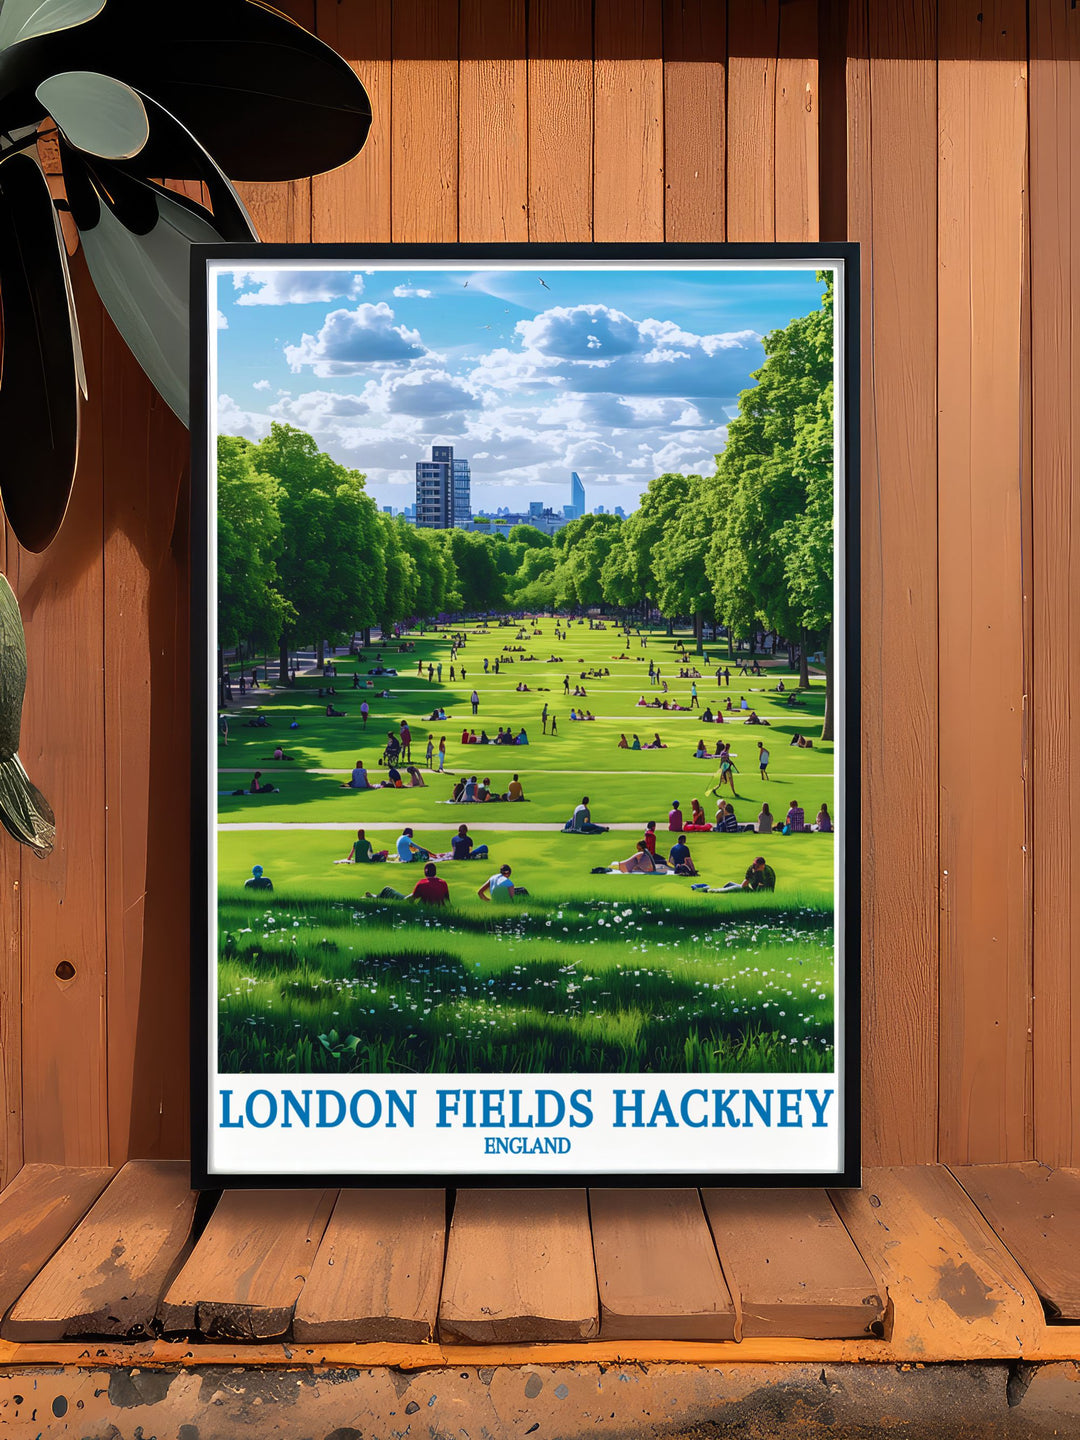 This art print highlights the picturesque scenery of London Fields Hackney, with its tree lined paths and recreational areas, making it a perfect addition to your urban park art collection.